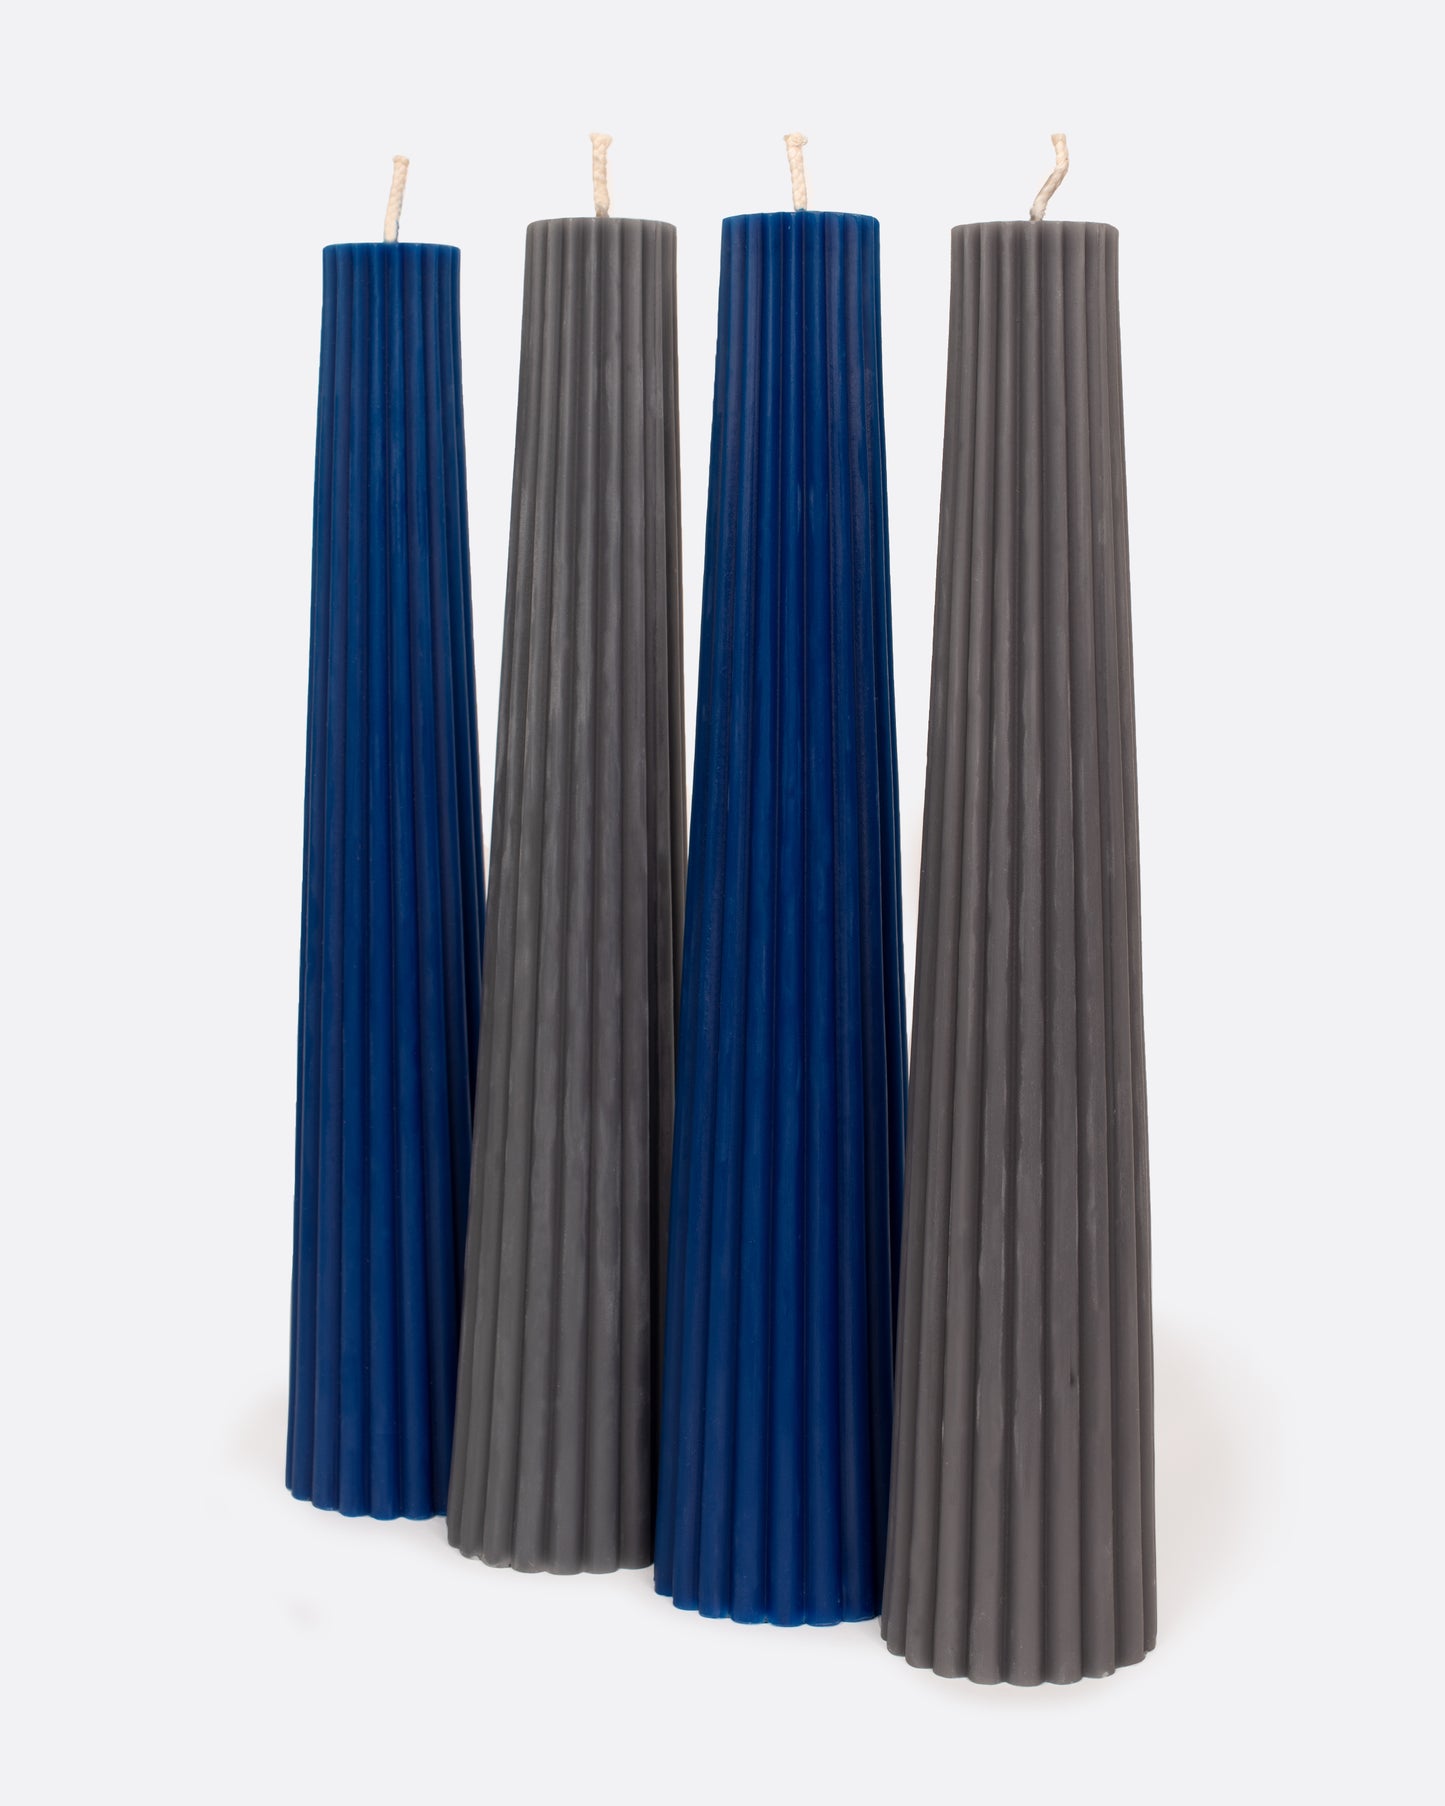 Four beeswax candles, two blue and two gray, standing in alternating colors.